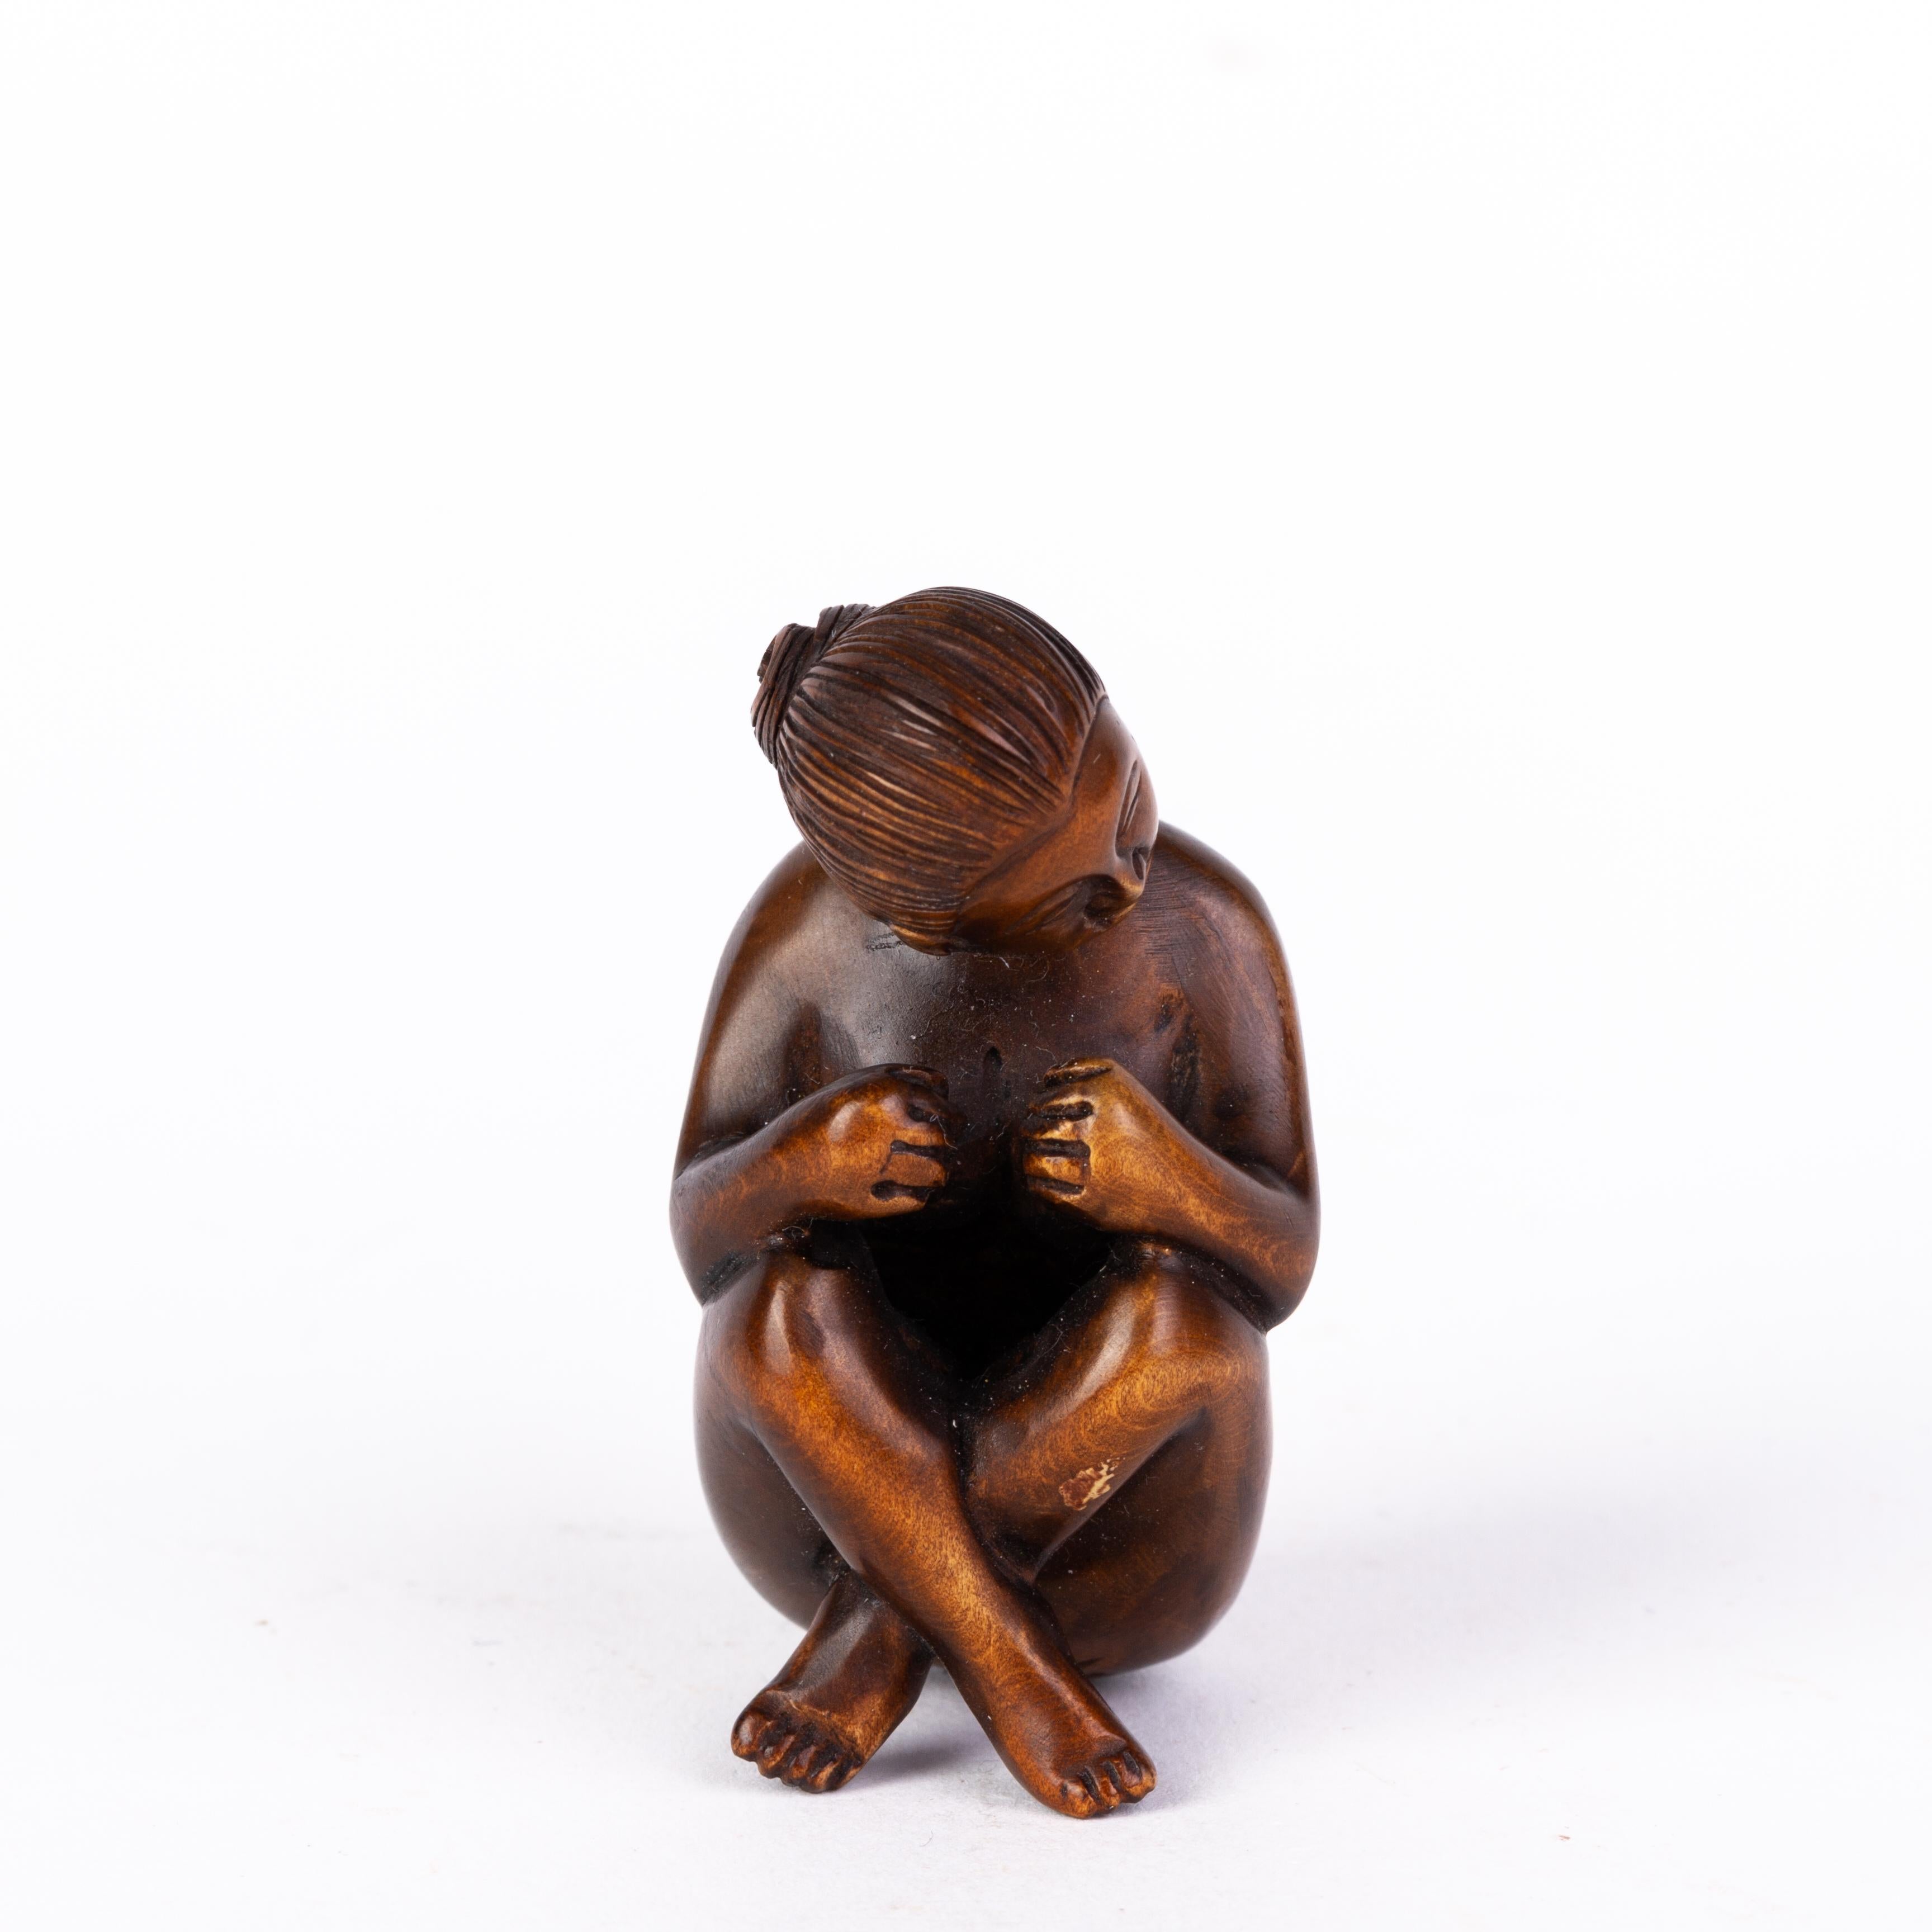 Signed Erotic Nude Woman Japanese Carved Boxwood Netsuke Inro Ojime
Very good condition.
From a private collection.
Free international shipping.